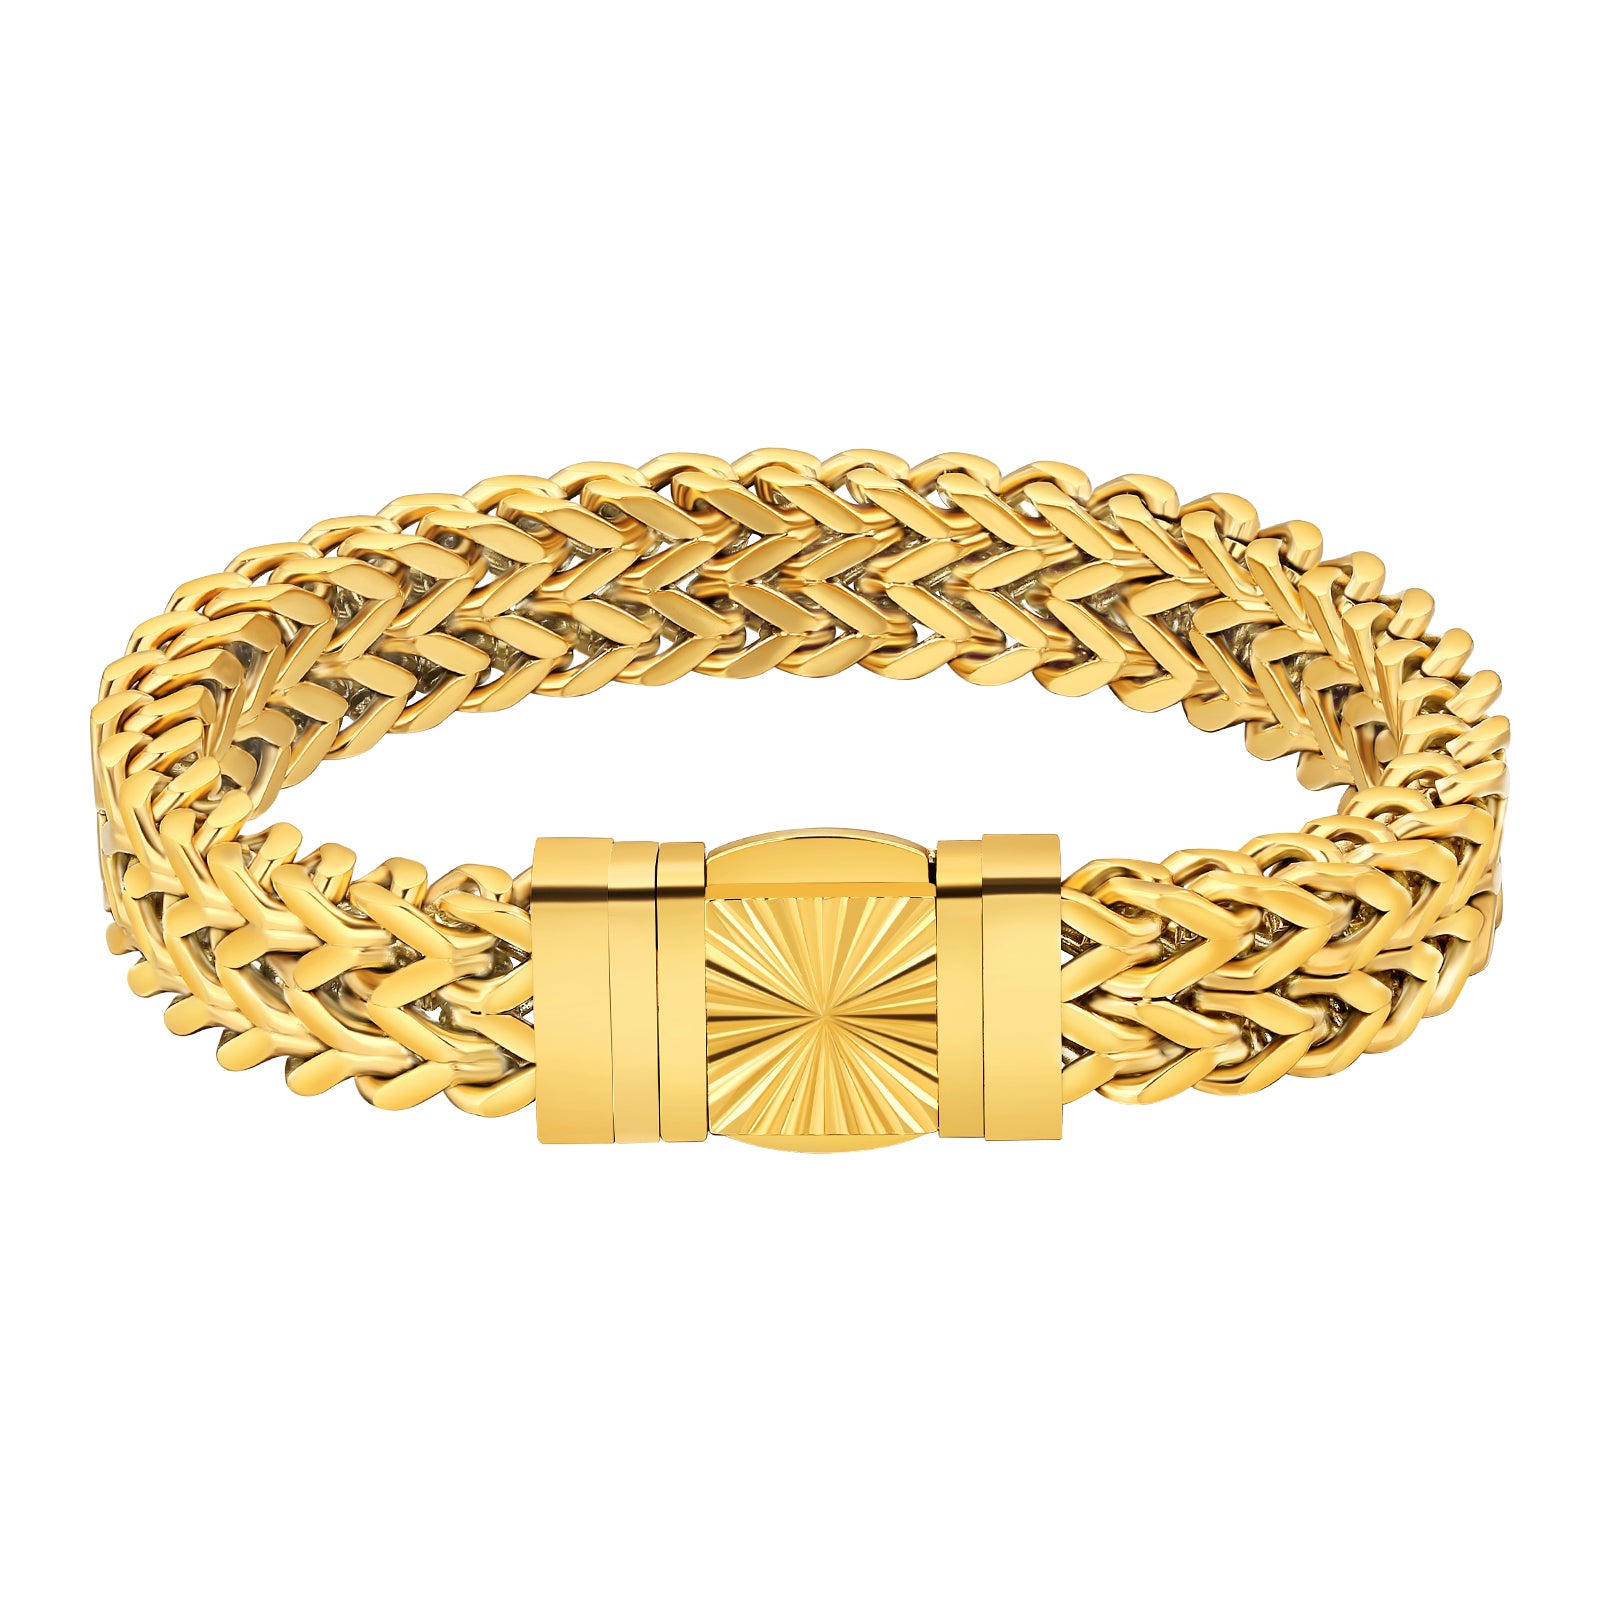 New 12mm 4-Sided Franco Bracelet with Embossed Clasp